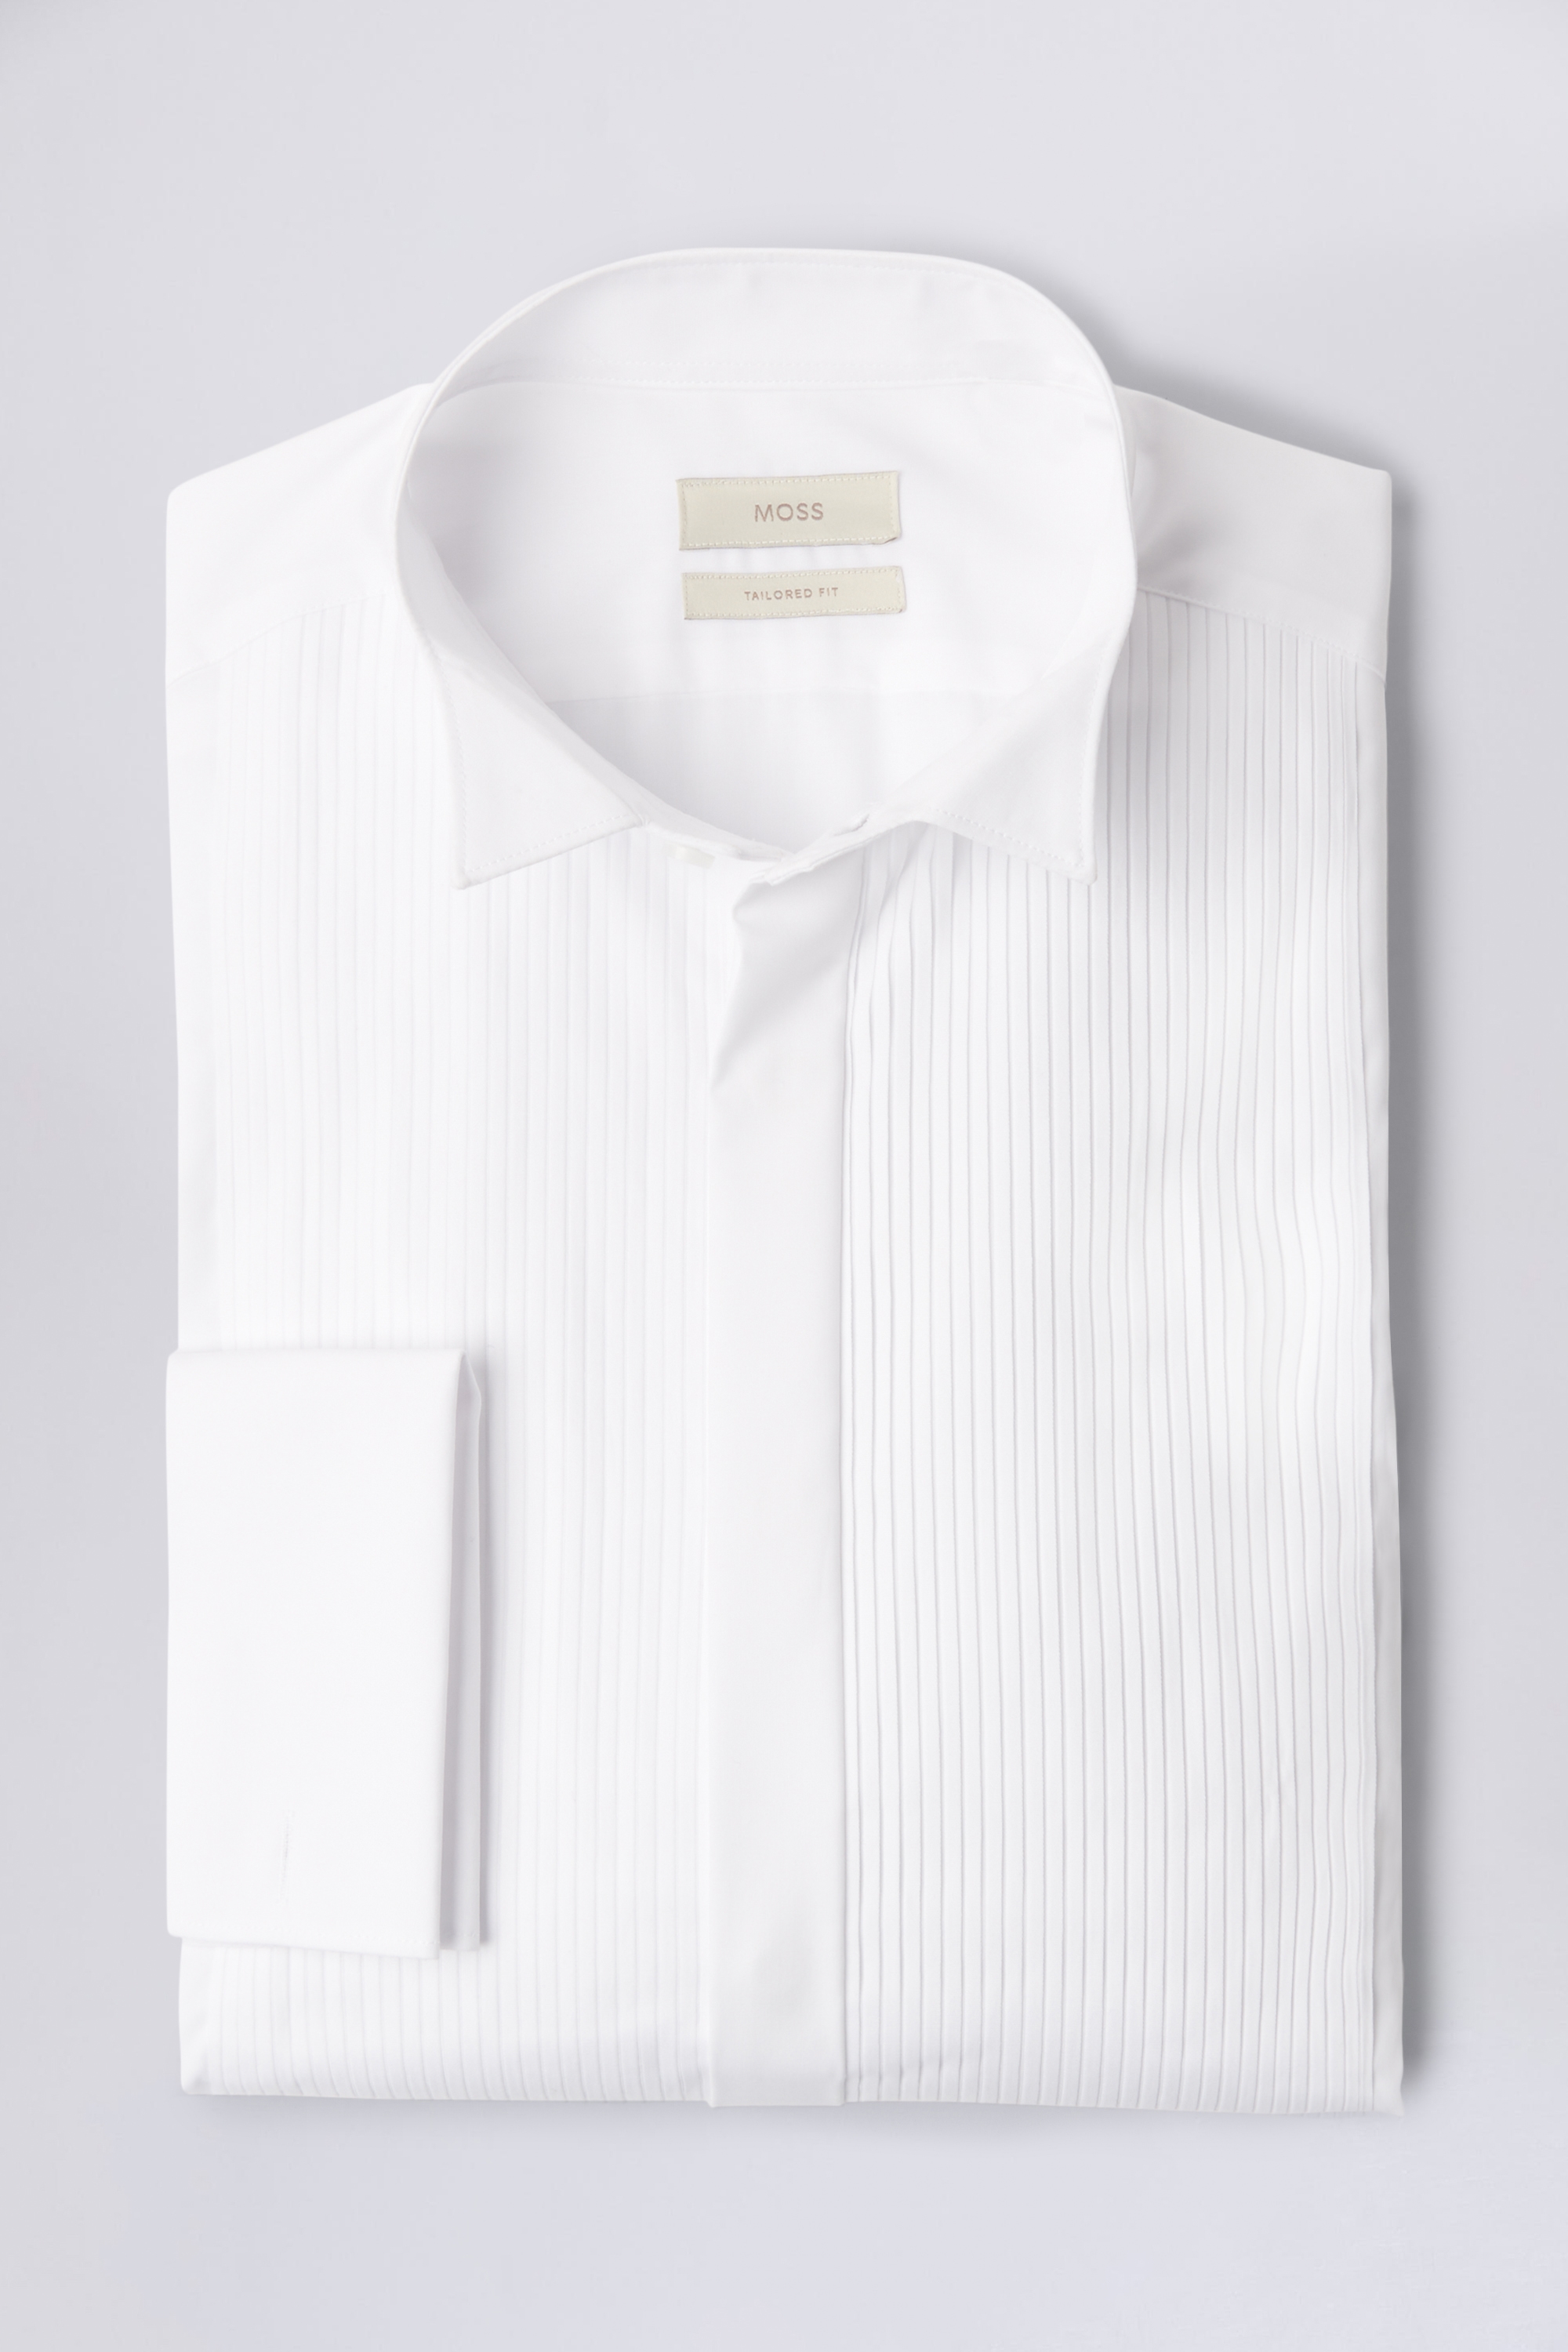 77760 Formal White Euro Wing Collar Shirt 1/2 inch pleat 